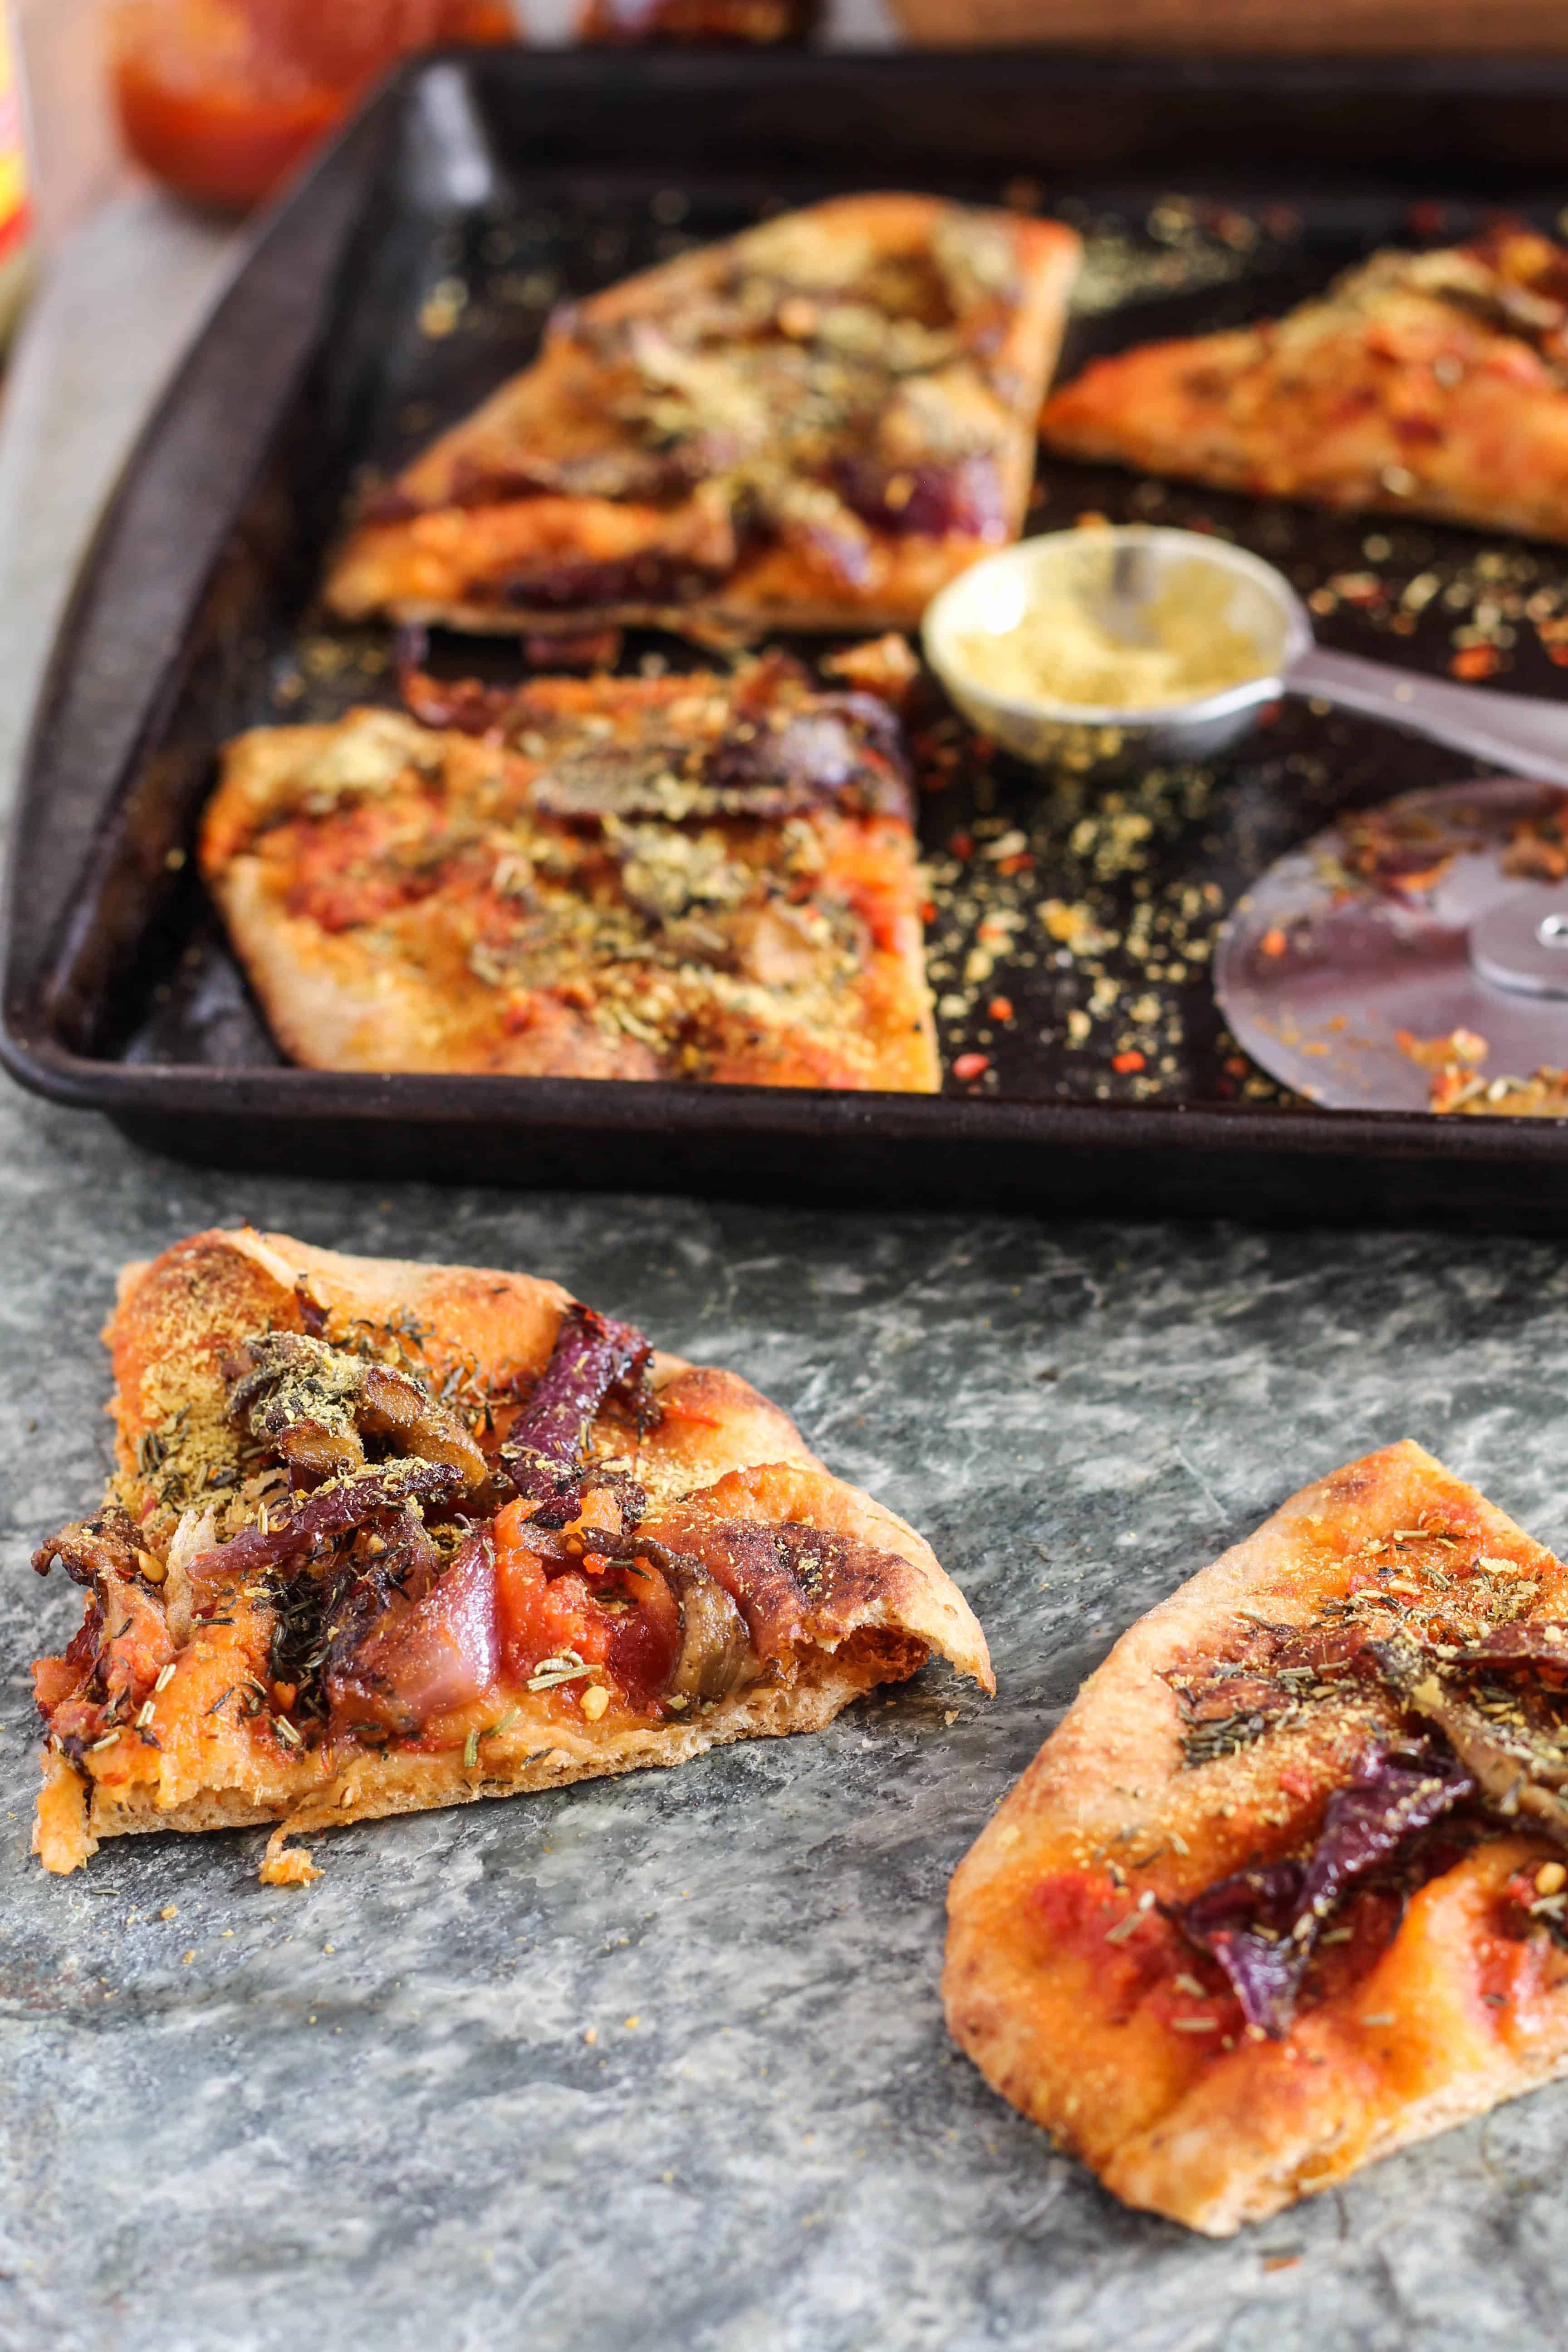 Vegan naan pizza is a healthy, fun, and delicious weeknight meal that the entire family will love. Recipe + sign up for a free plant-based cookbook!